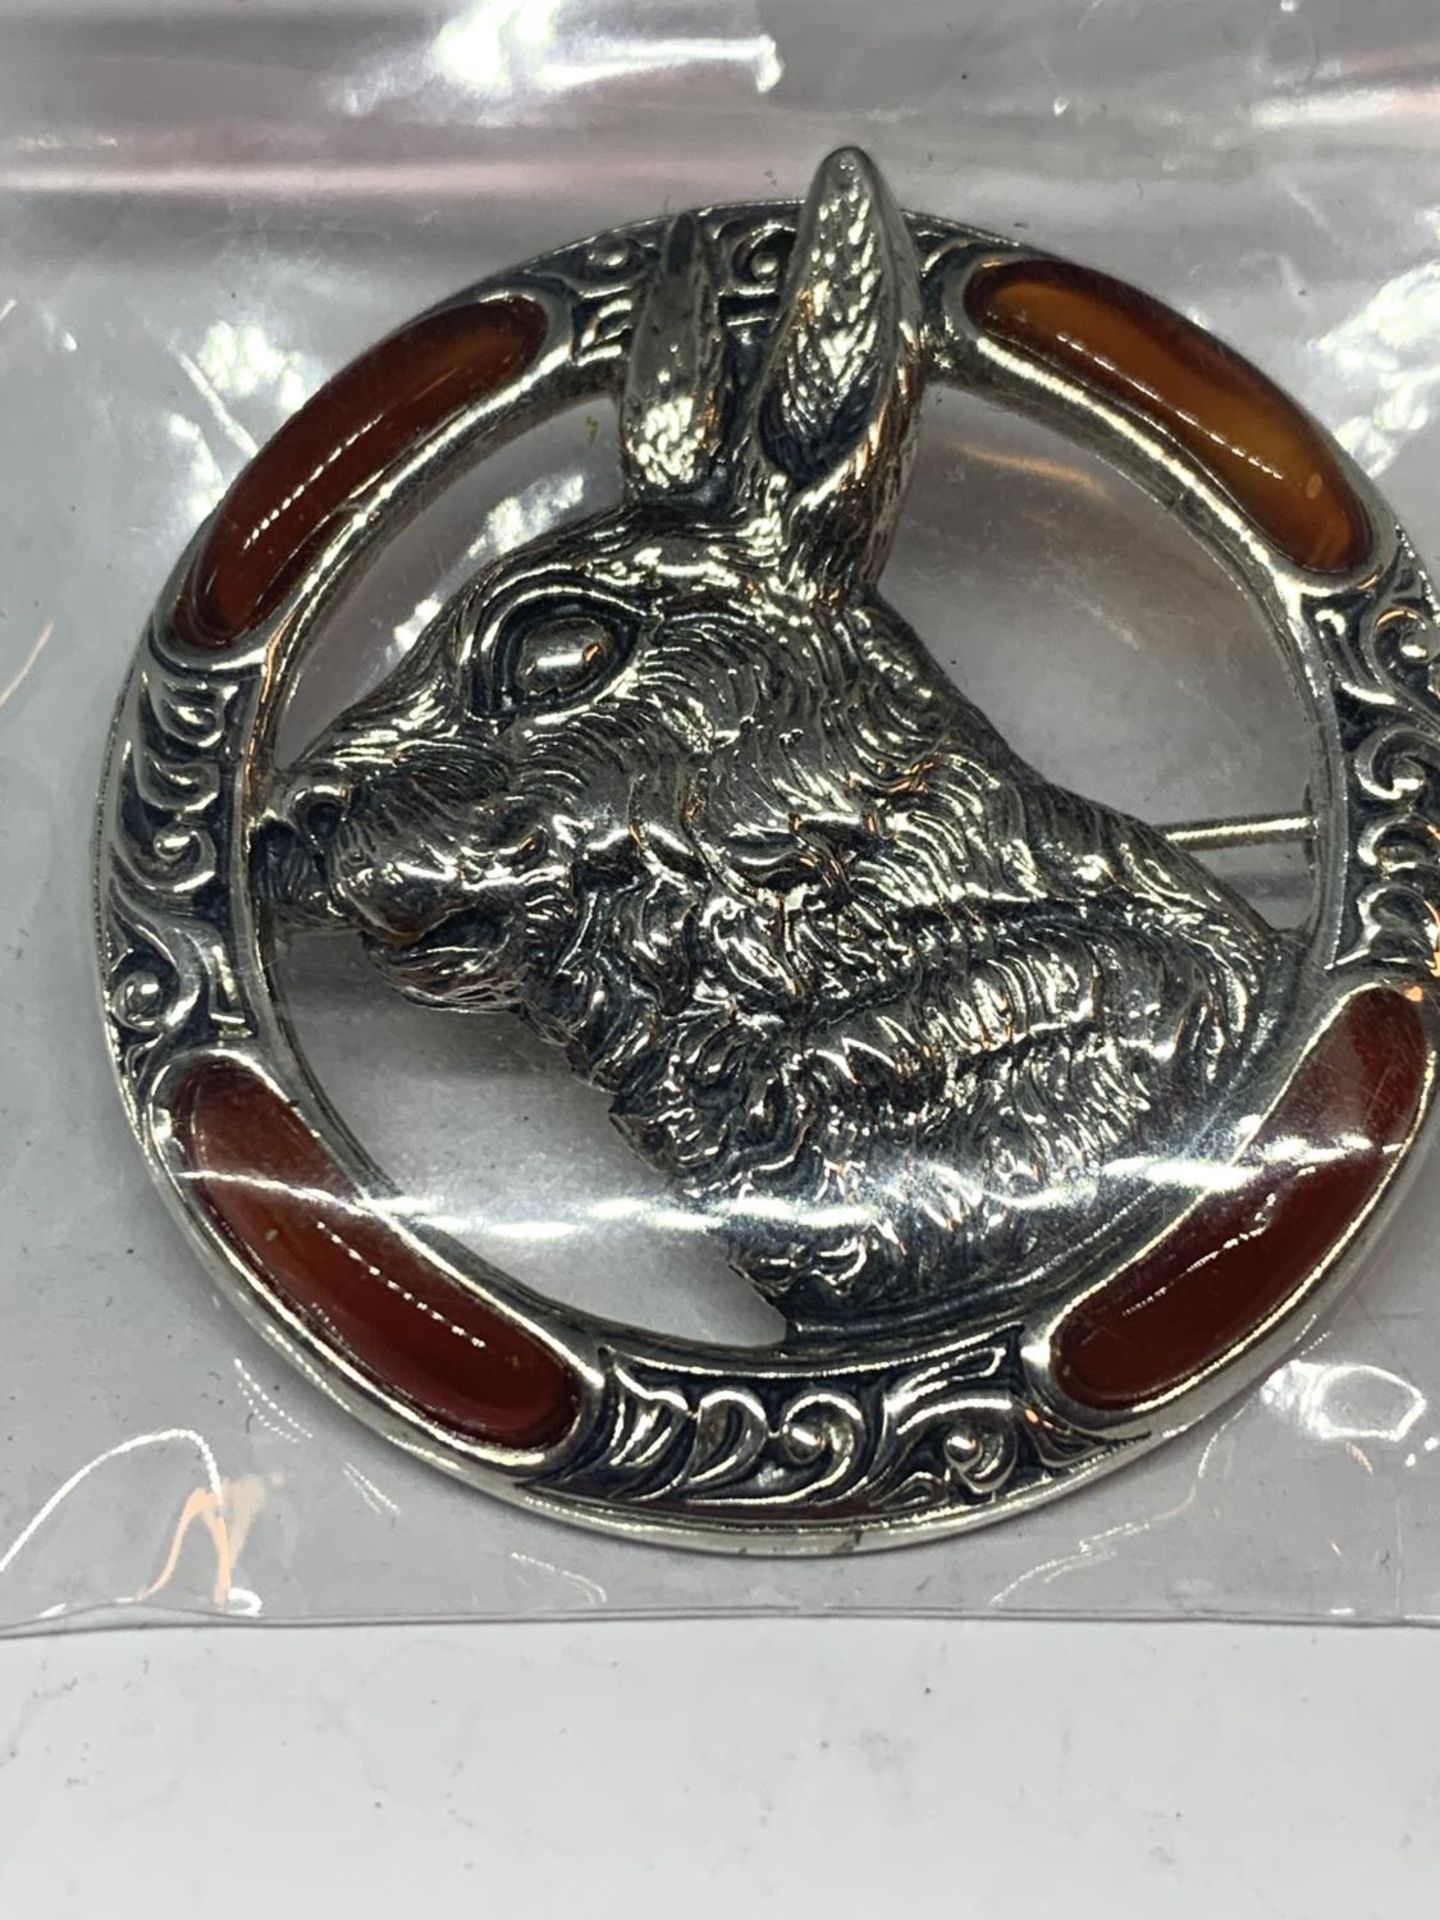 A MARKED SILVER AND AGATE BROOCH WITH A HARE DESIGN - Image 2 of 4